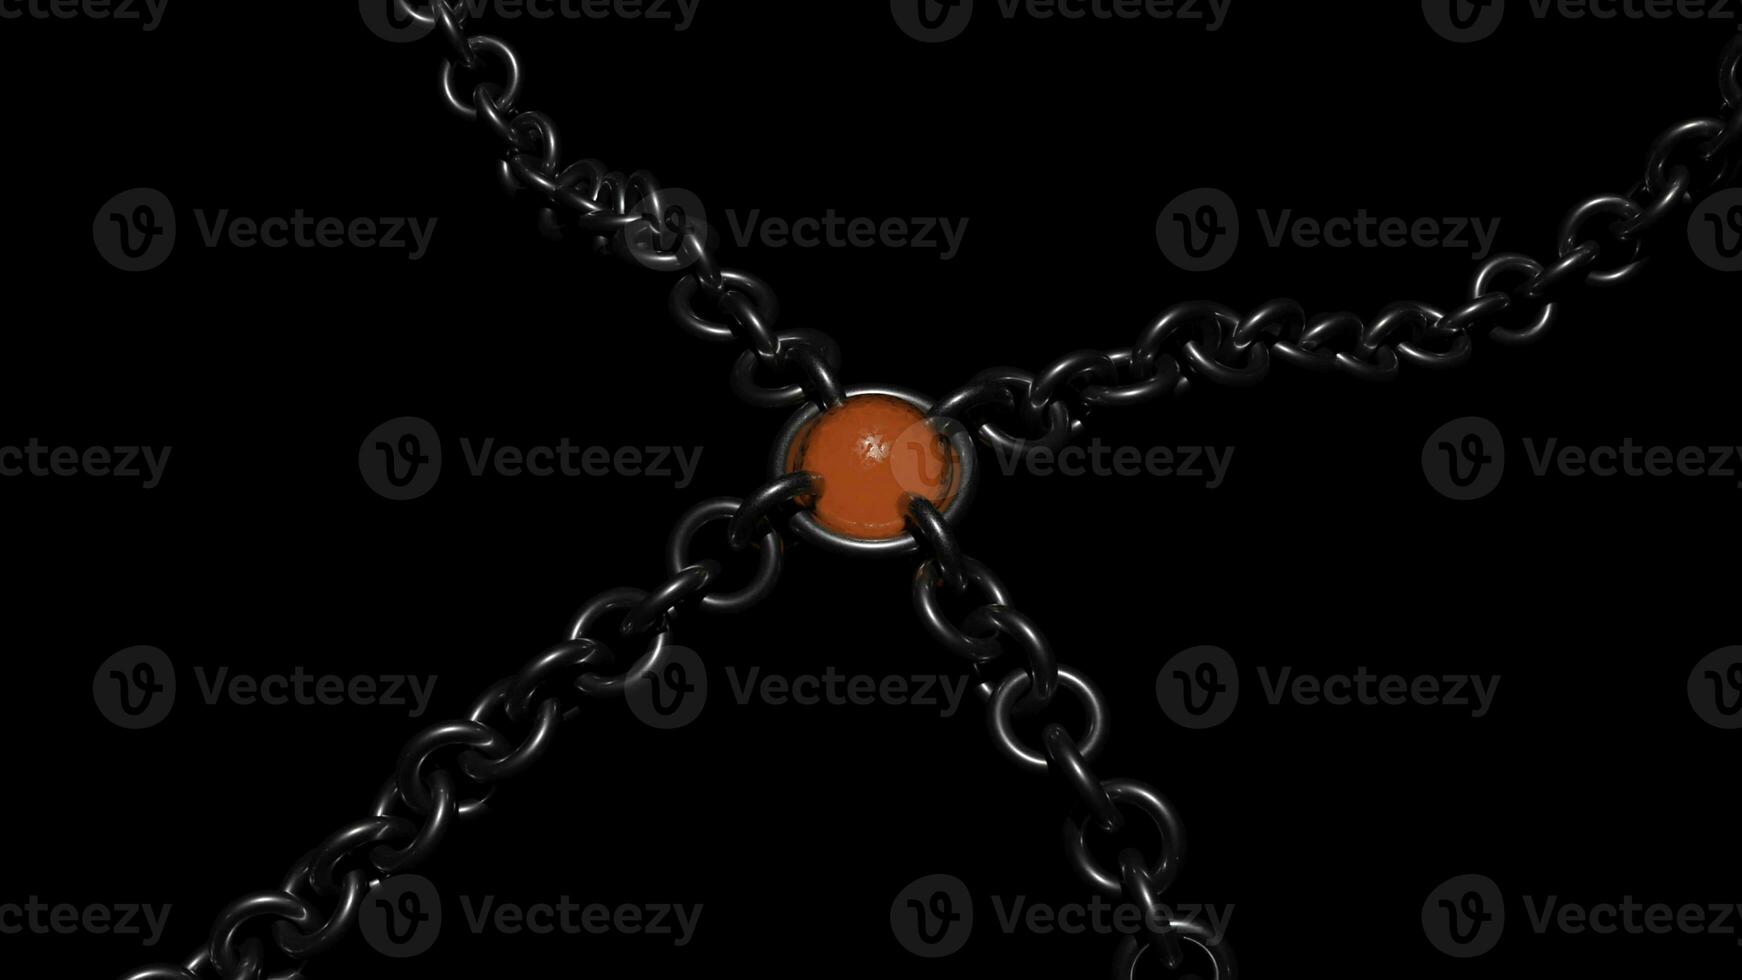 3d decoration with chains. Design. Medieval or magical jewelry with chains. Decoration with magic round stone with chains on black background photo